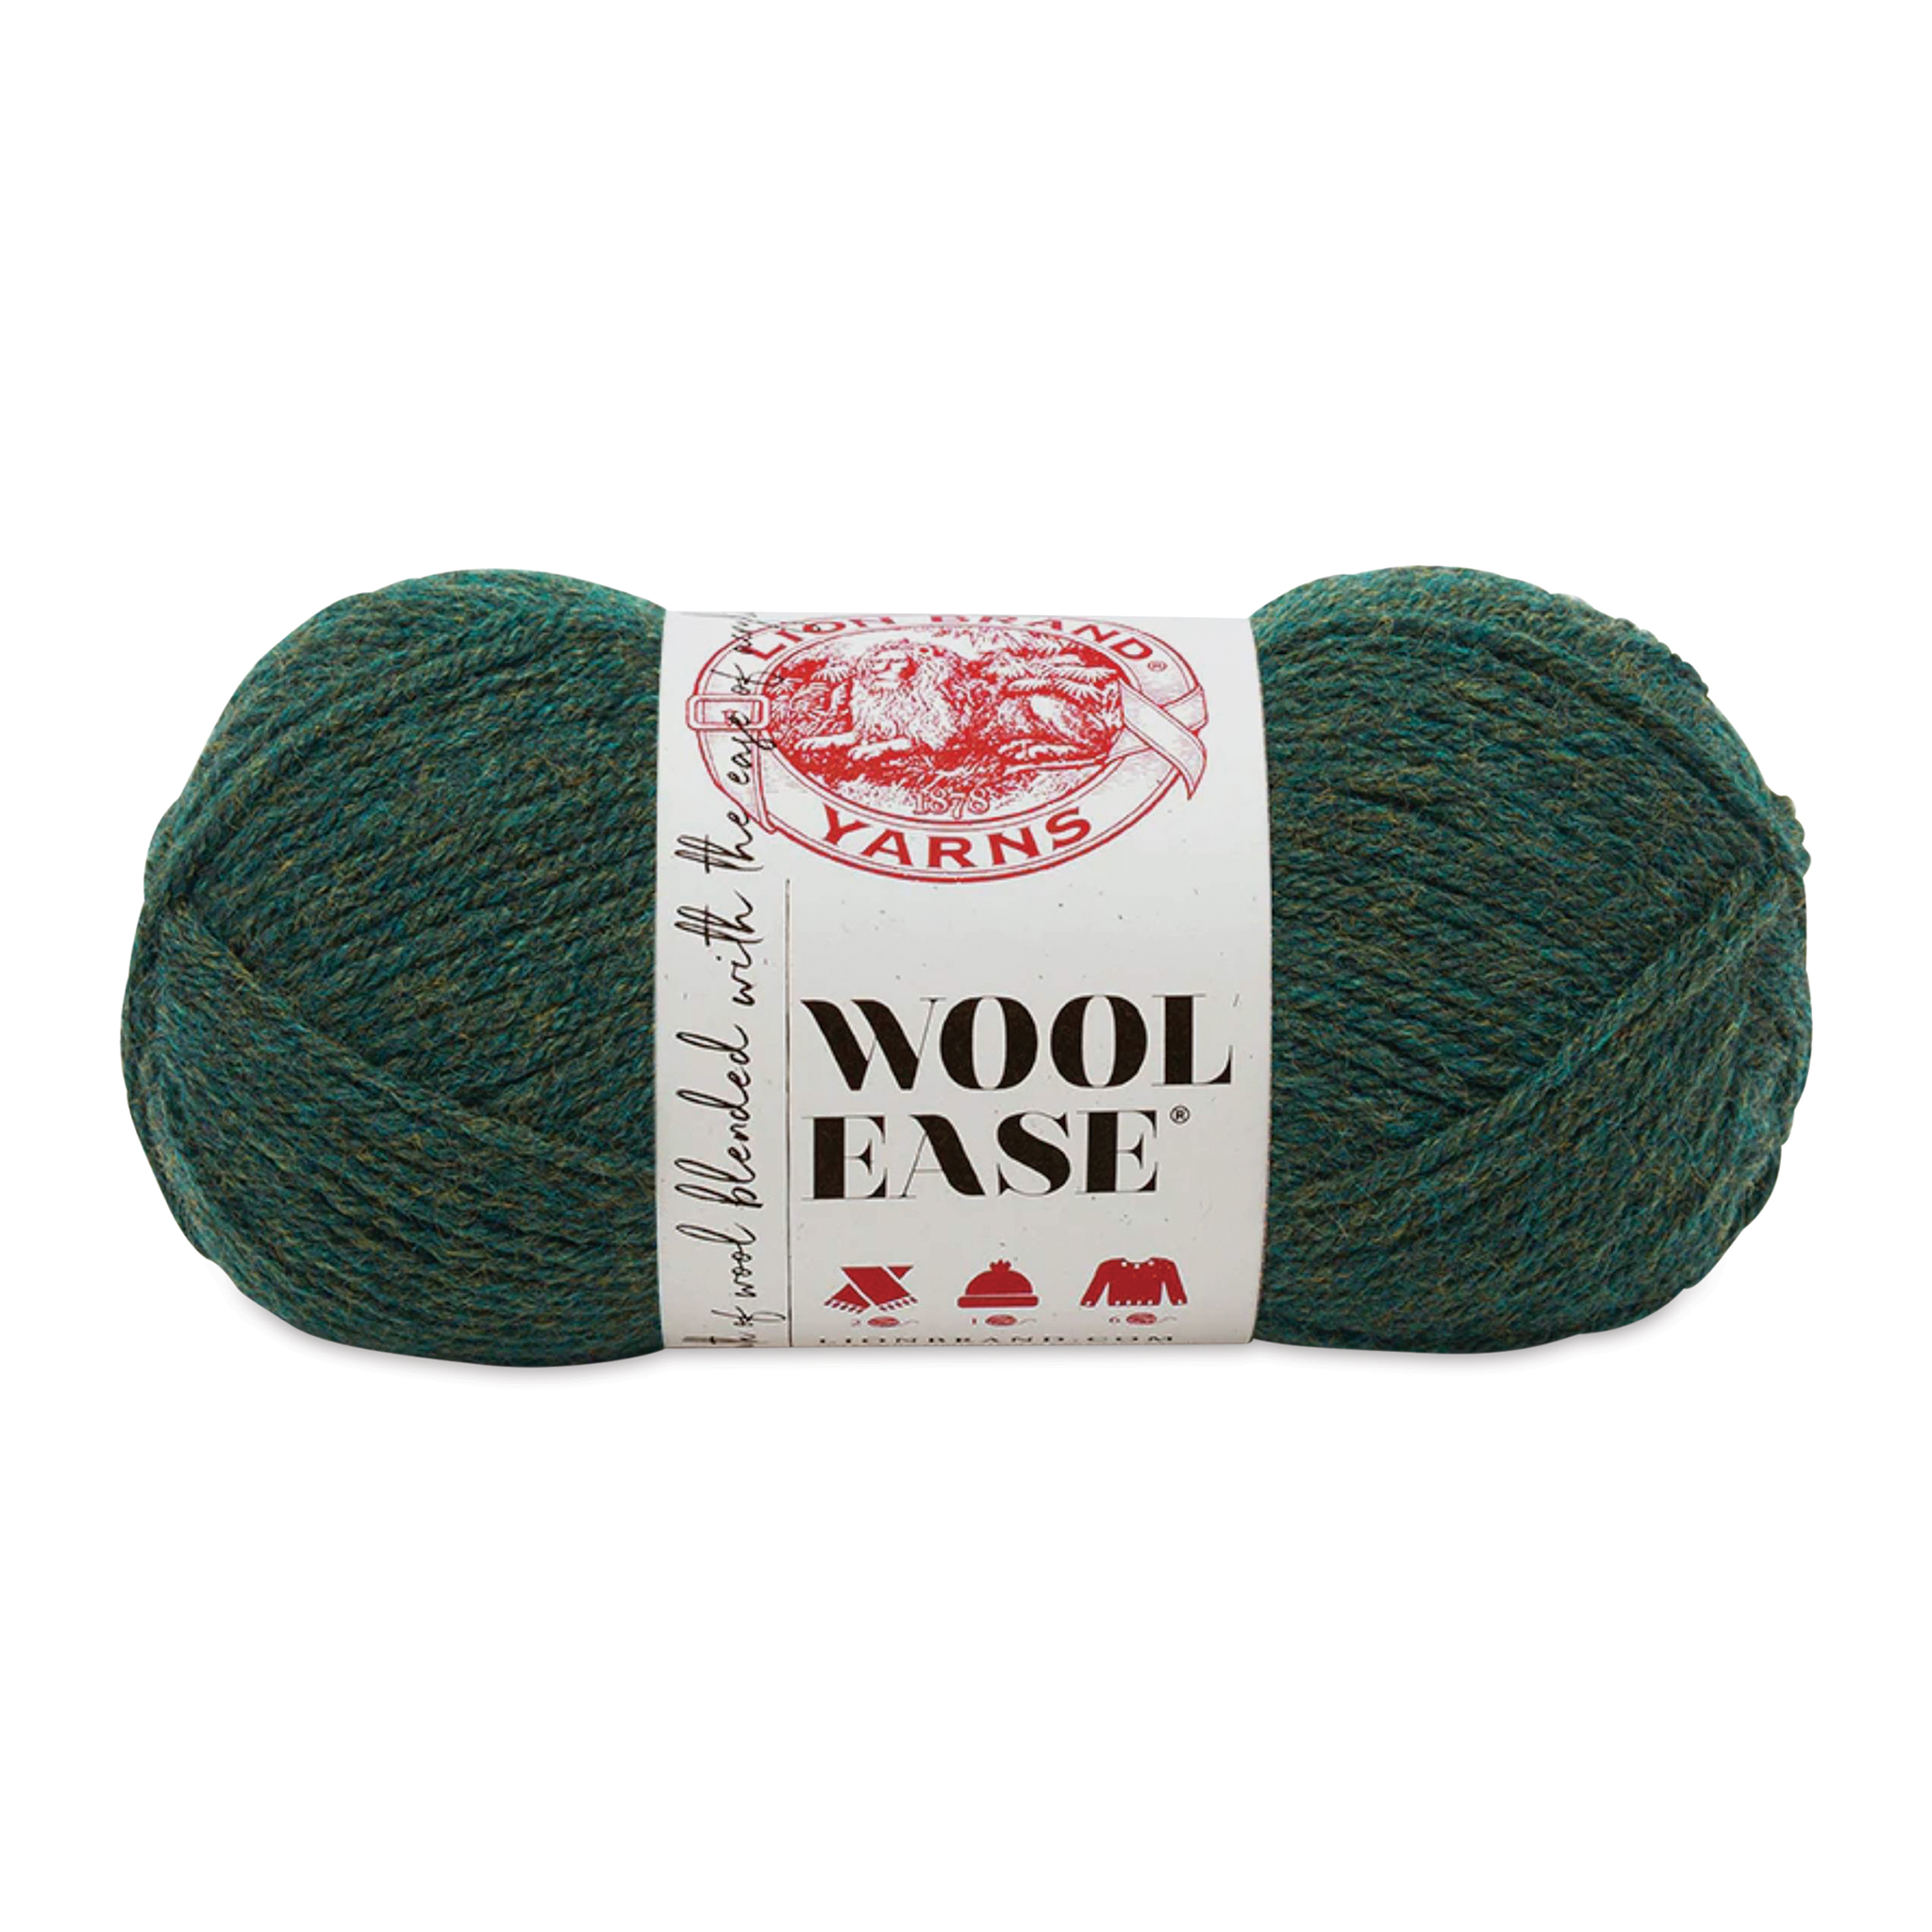 Lion Brand Wool-Ease Yarn - Forest Heather